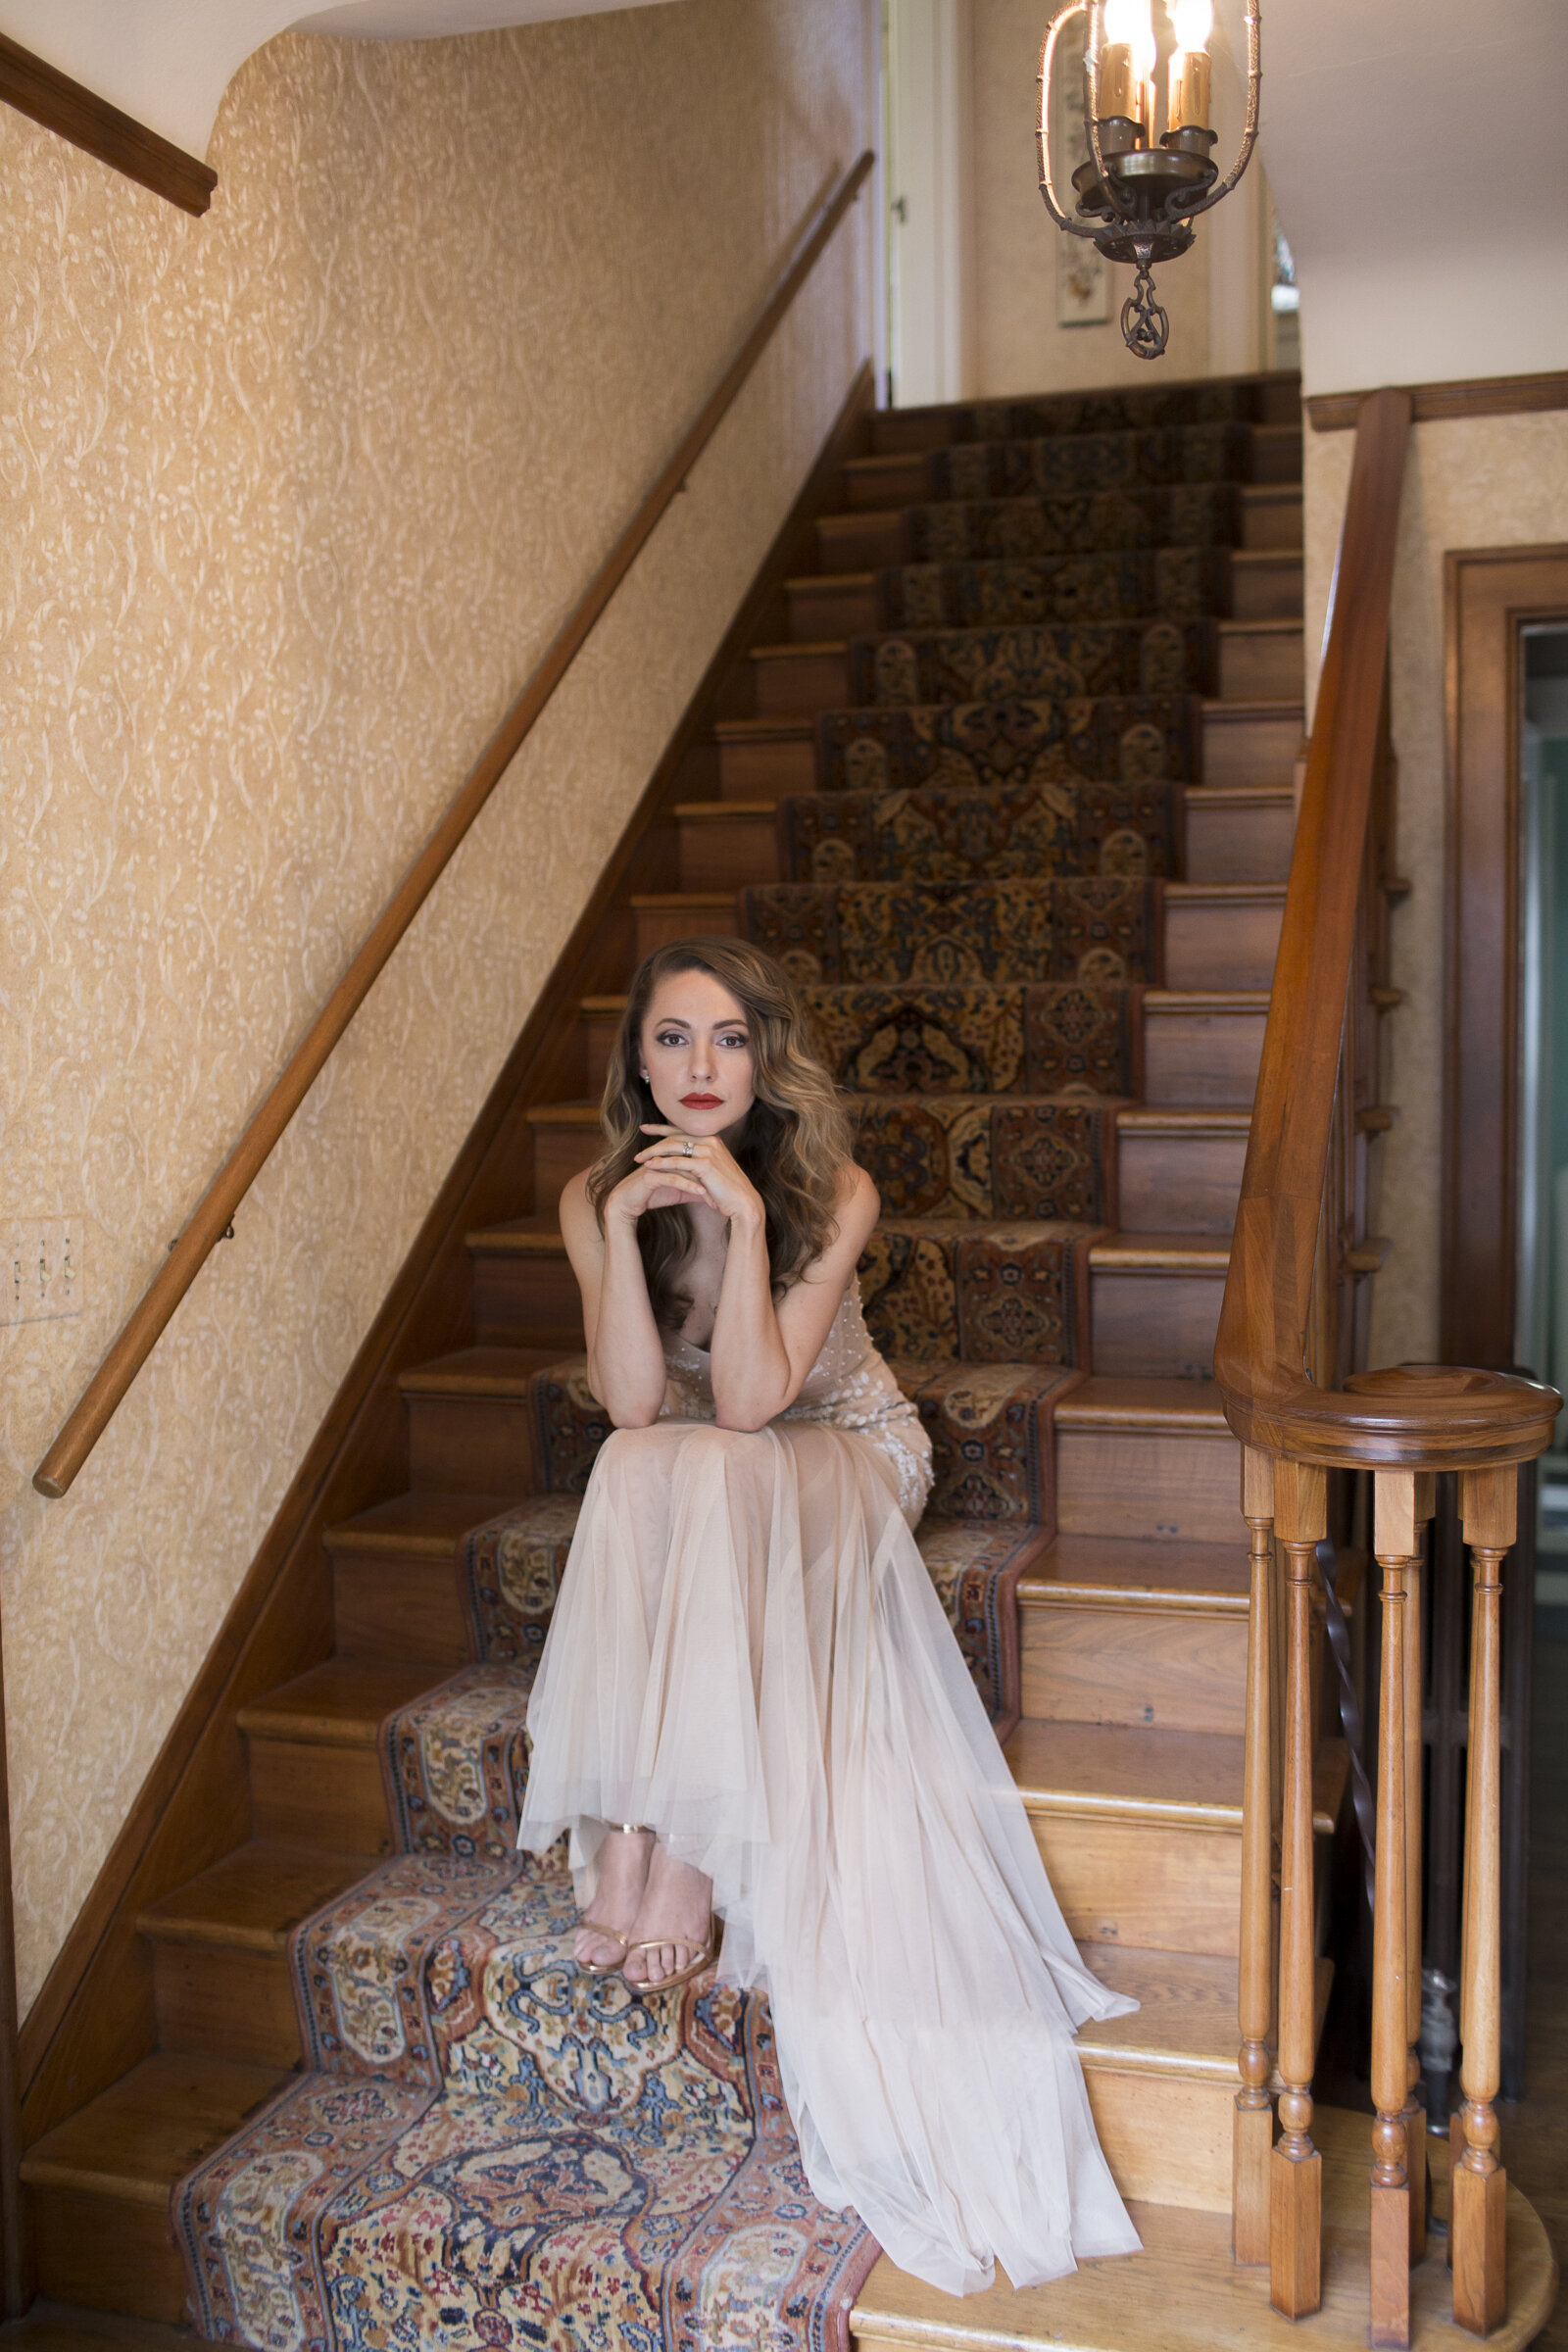 Chic Dress on stairs